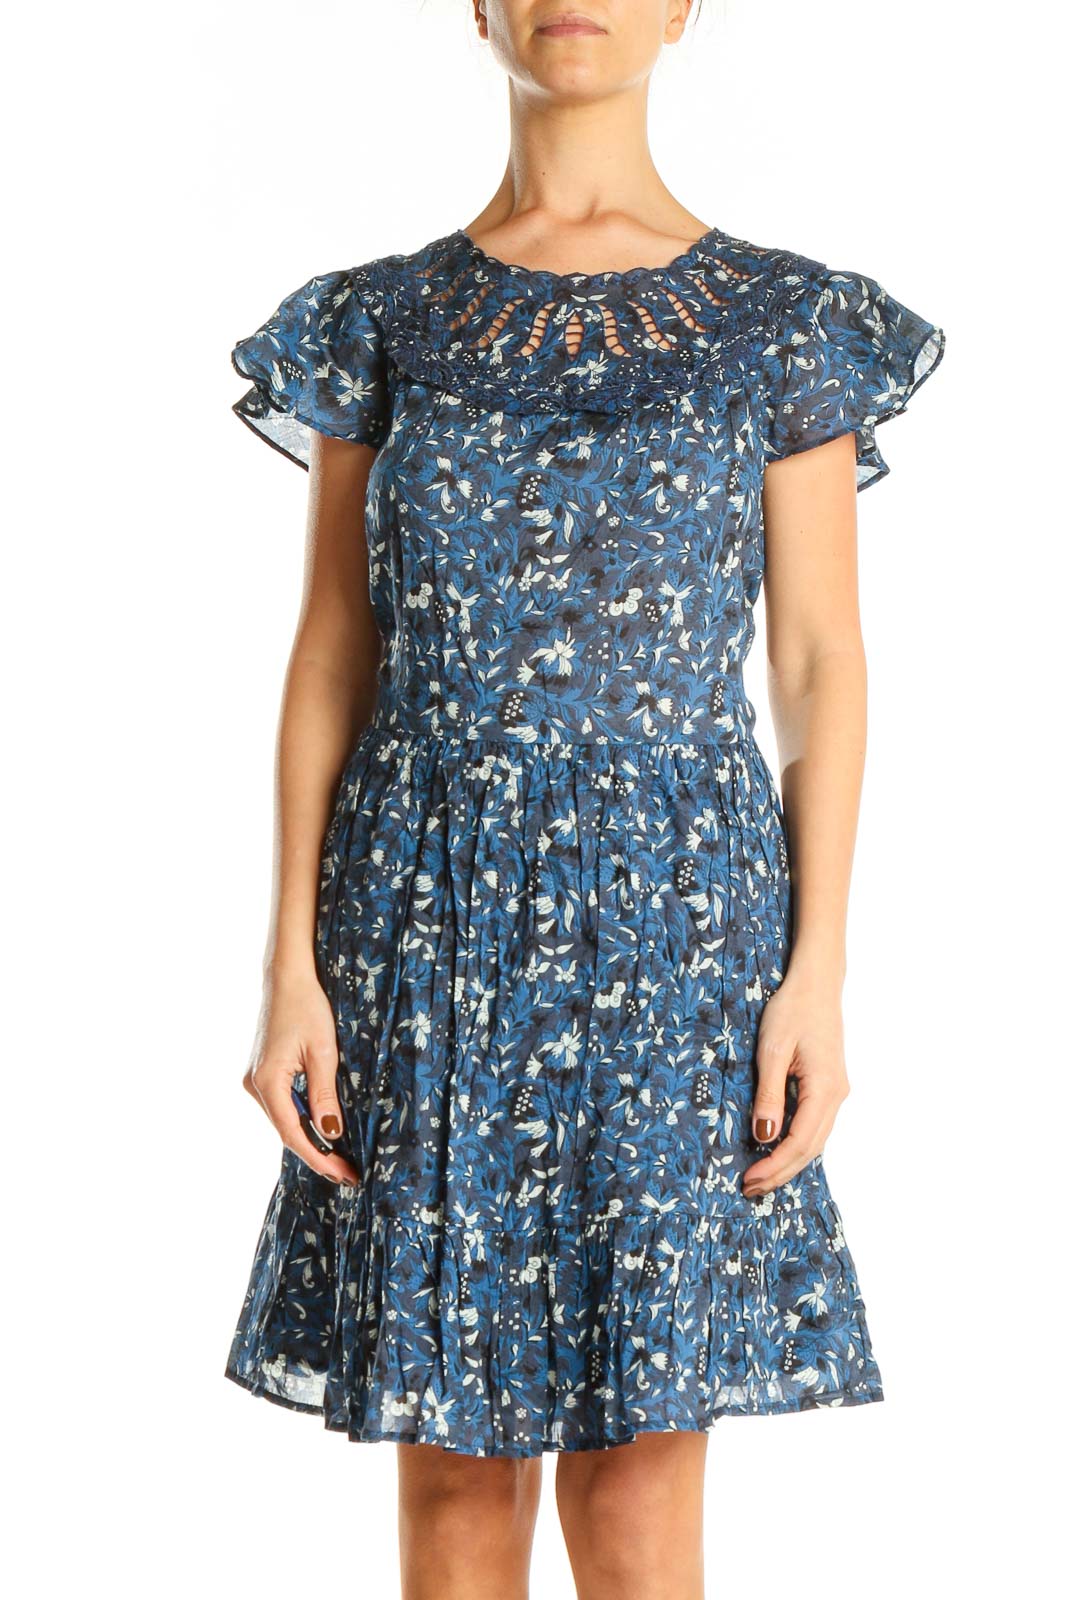 Blue Floral Print Chic Fit & Flare Dress Front